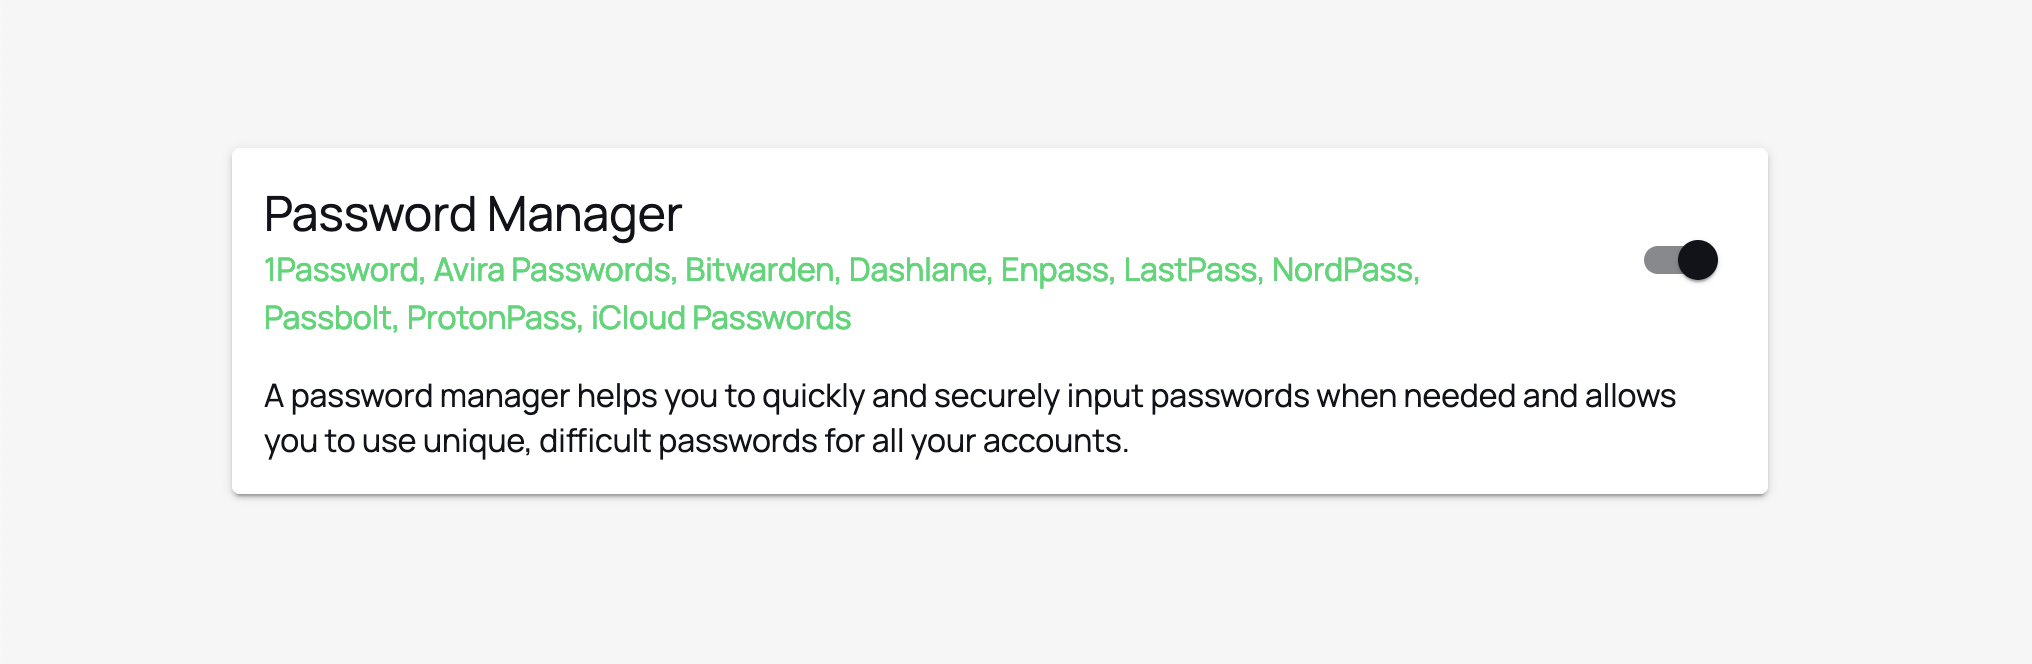 Expanded password manager support